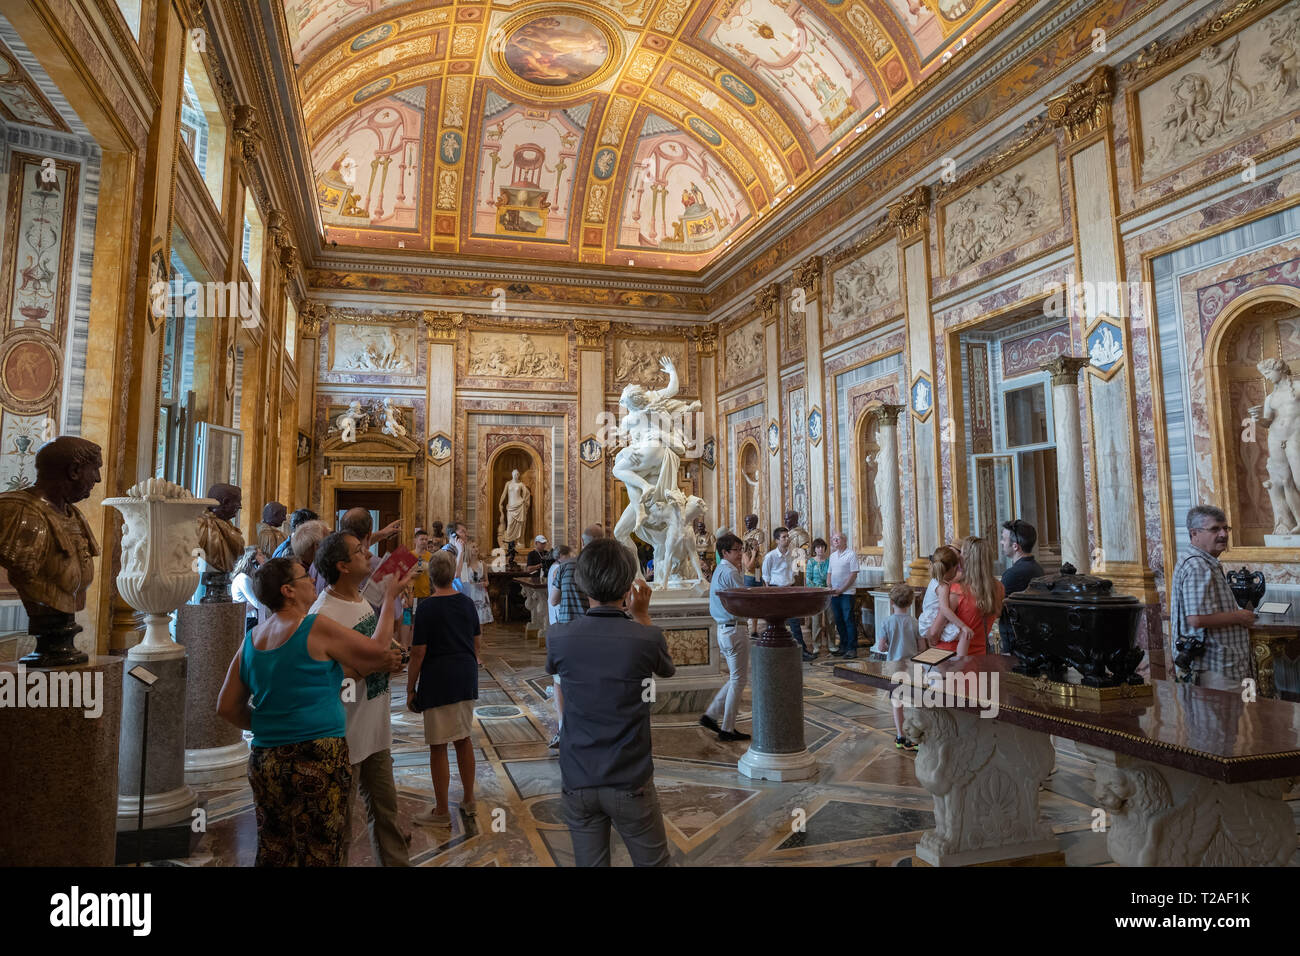 Rome, Italy - June 22, 2018: Baroque marble sculptural group by Italian artist in Galleria Borghese of Villa Borghese Stock Photo